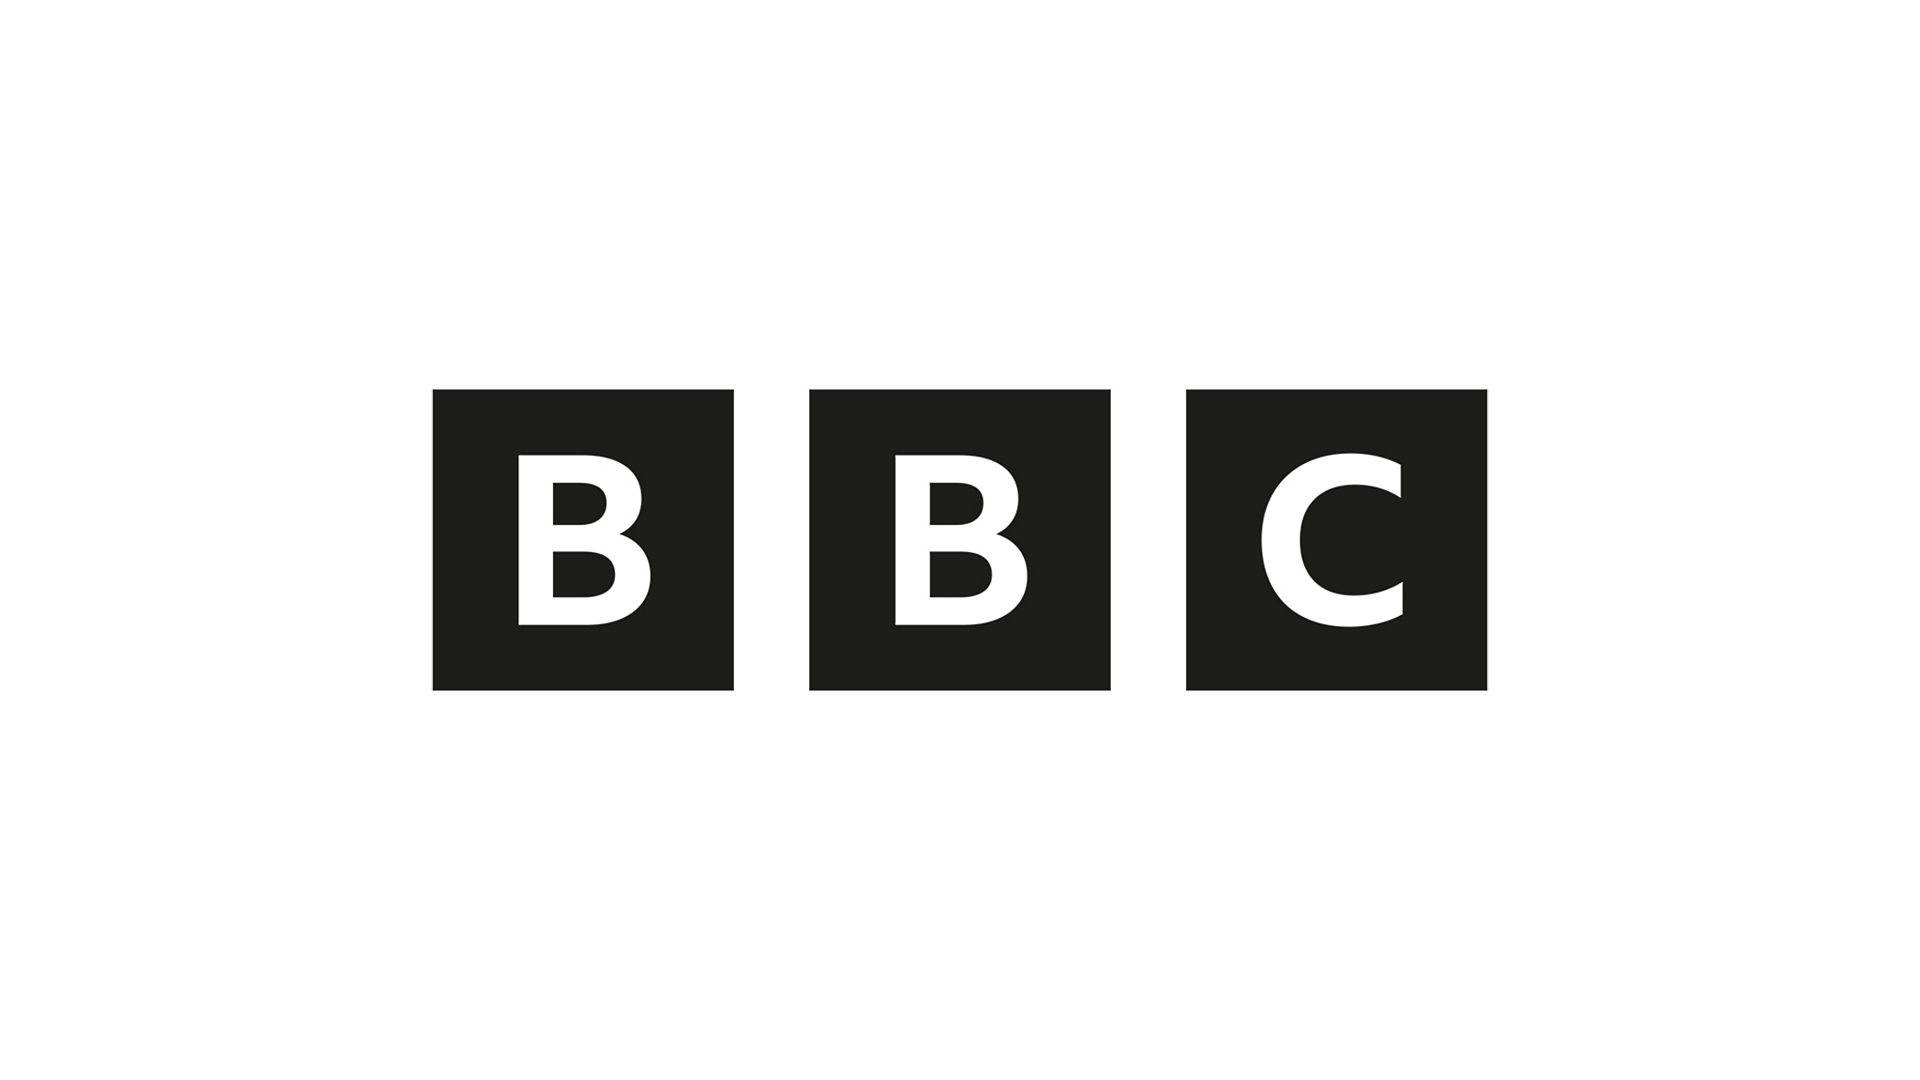 Update on BBC Review into Conduct of Russell Brand and call for information